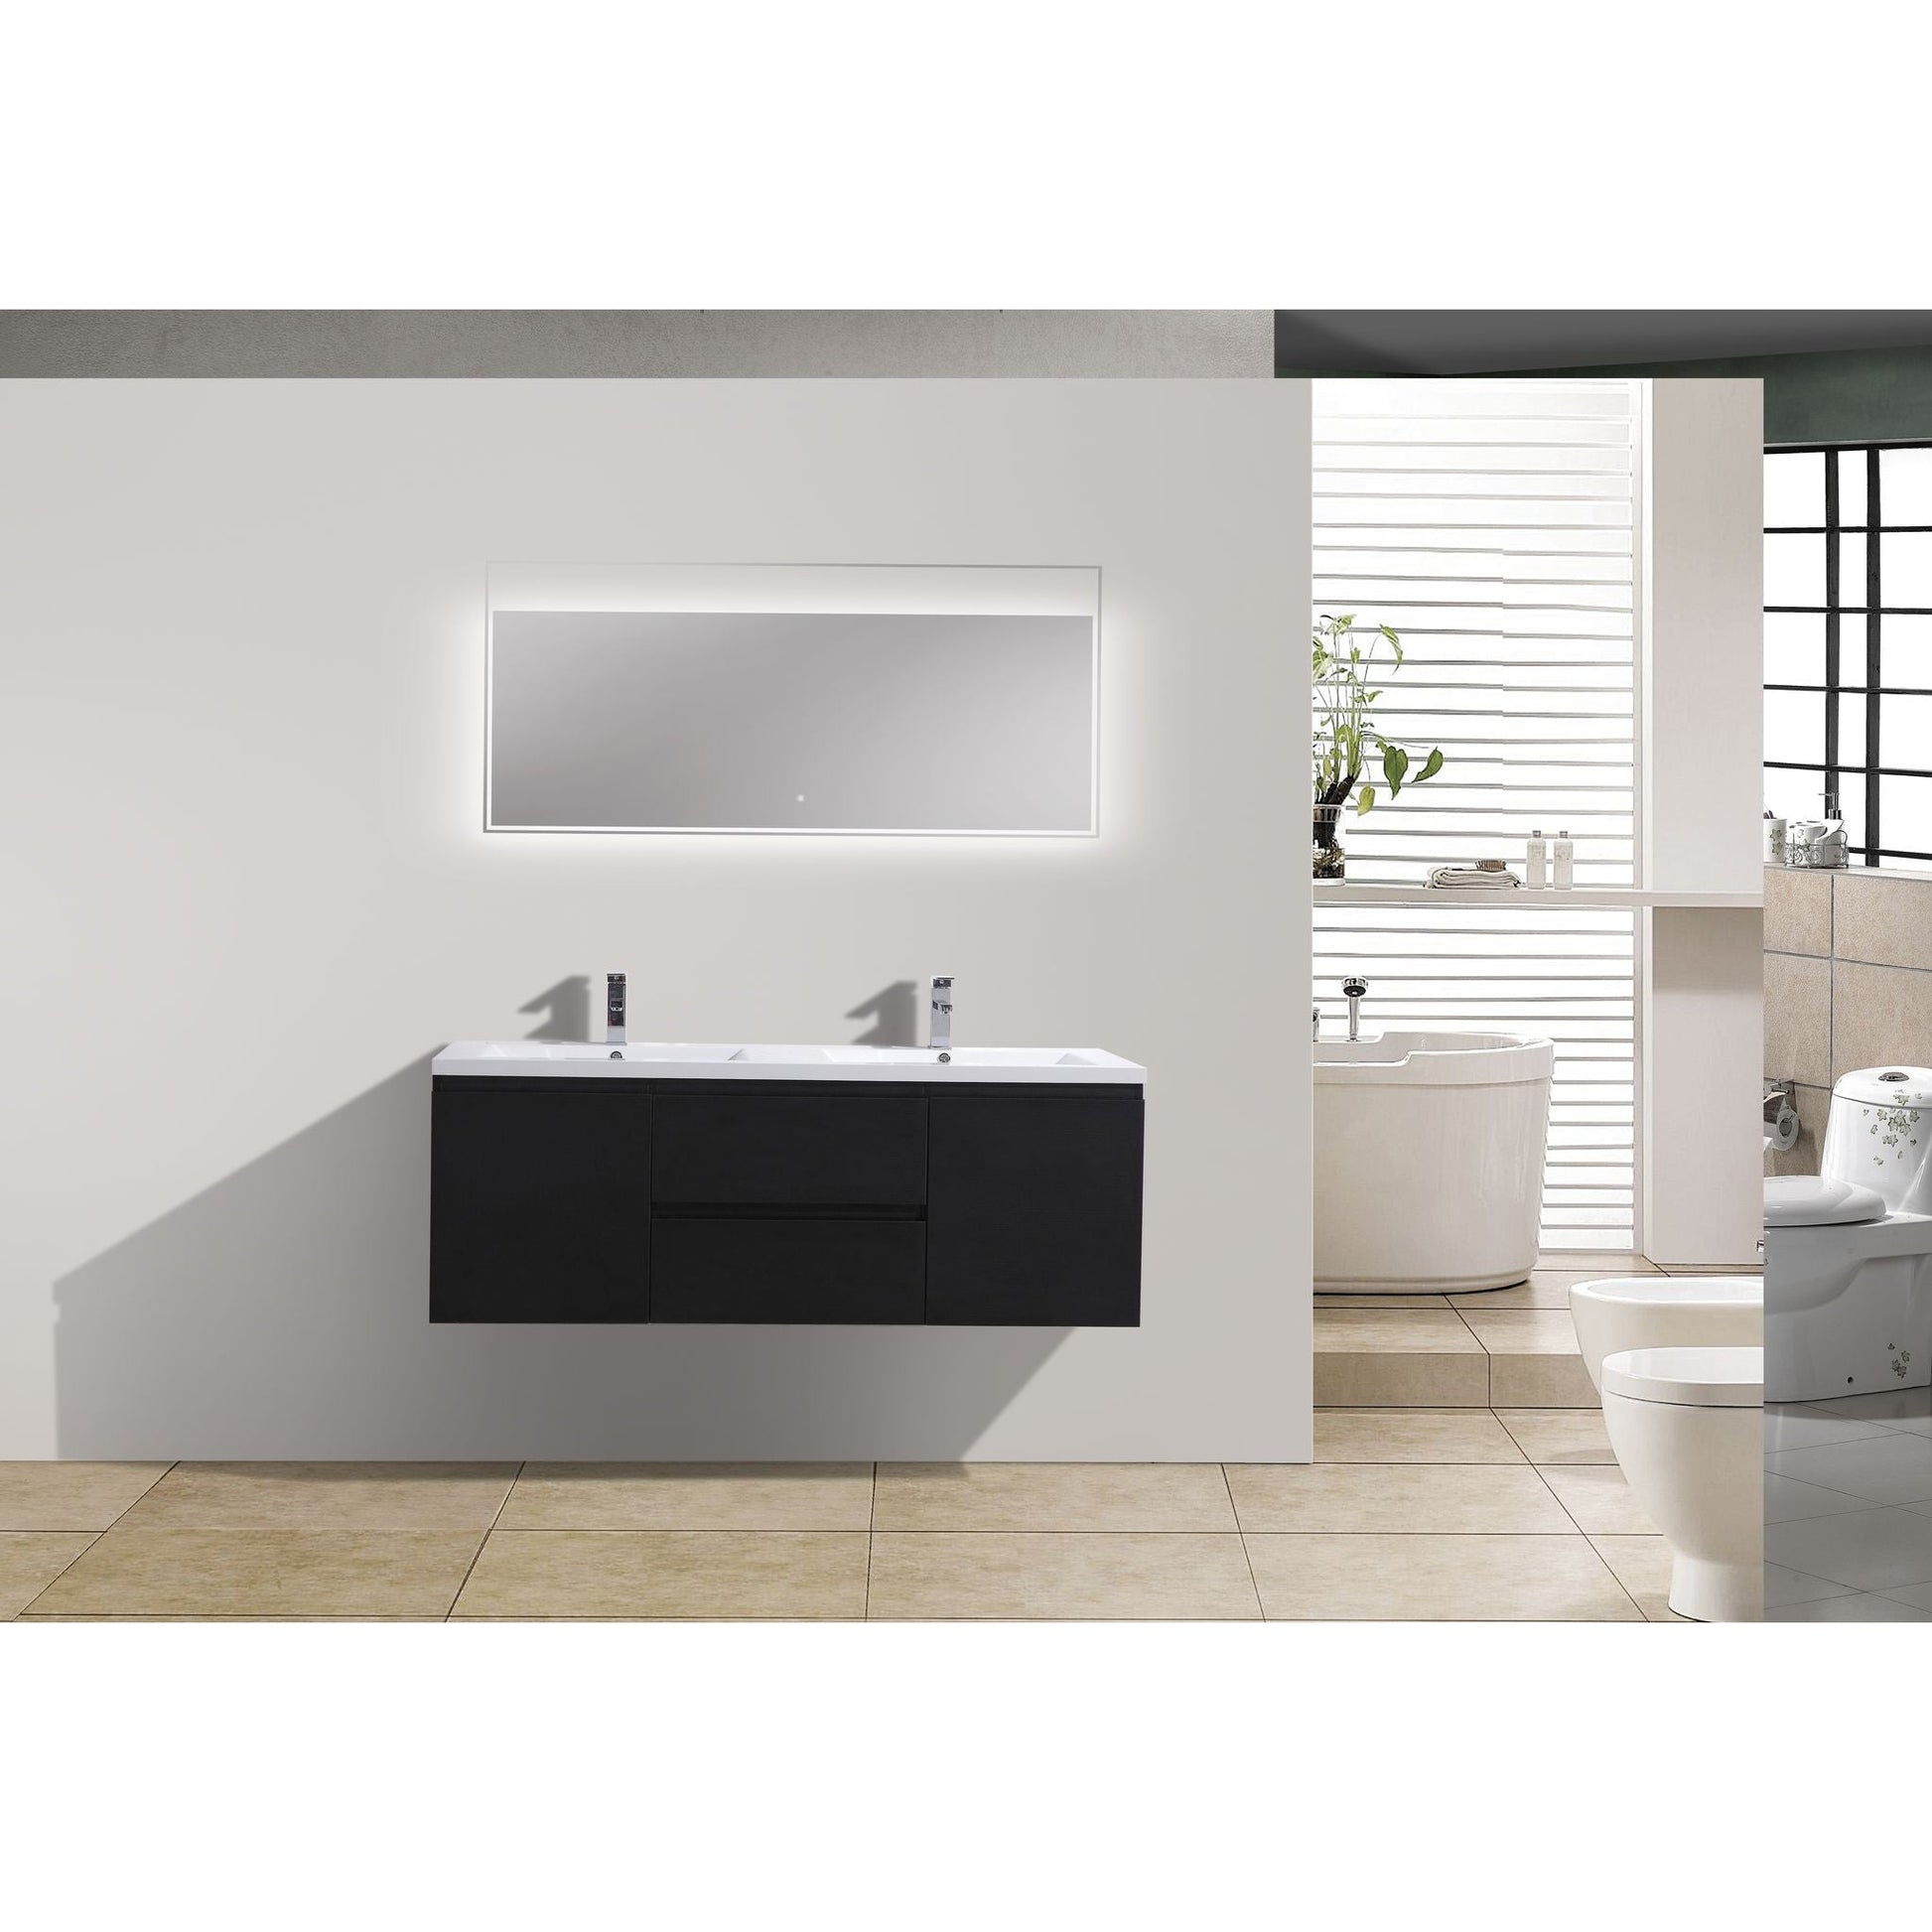 Moreno Bath Bohemia Lina 60" Rich Black Wall-Mounted Vanity With Double Reinforced White Acrylic Sinks